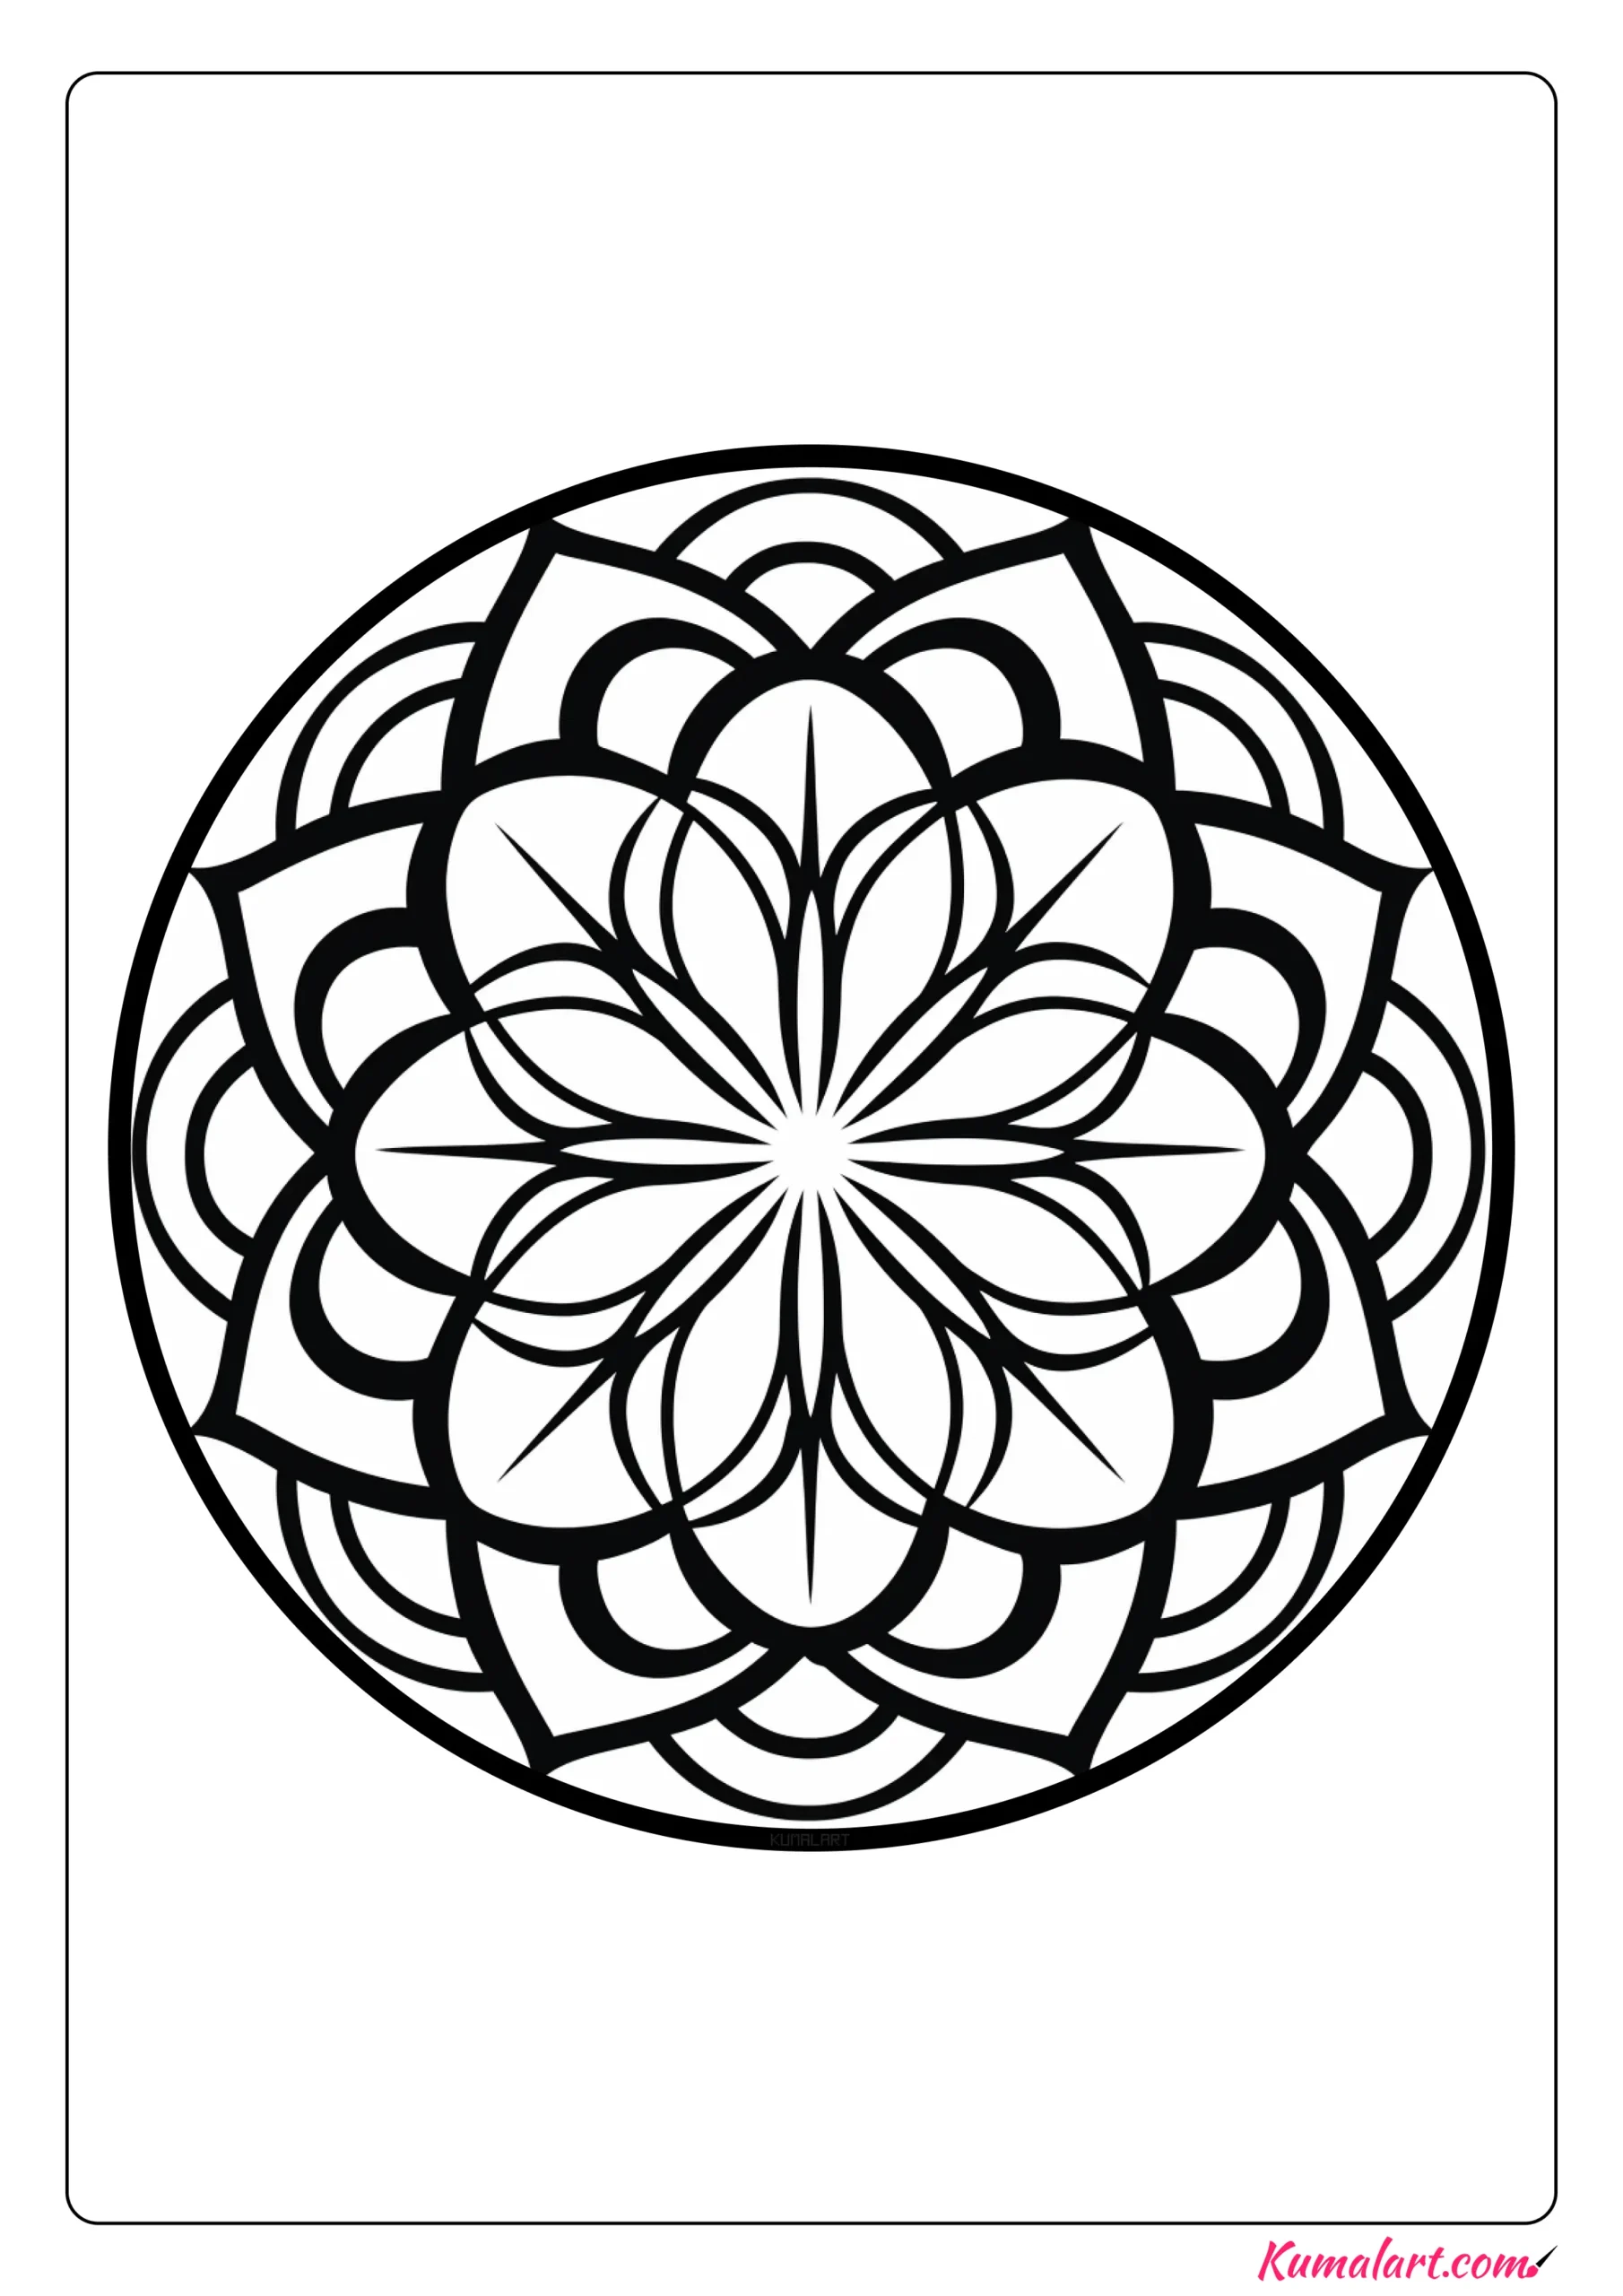 Bright Star Floral Coloring Page